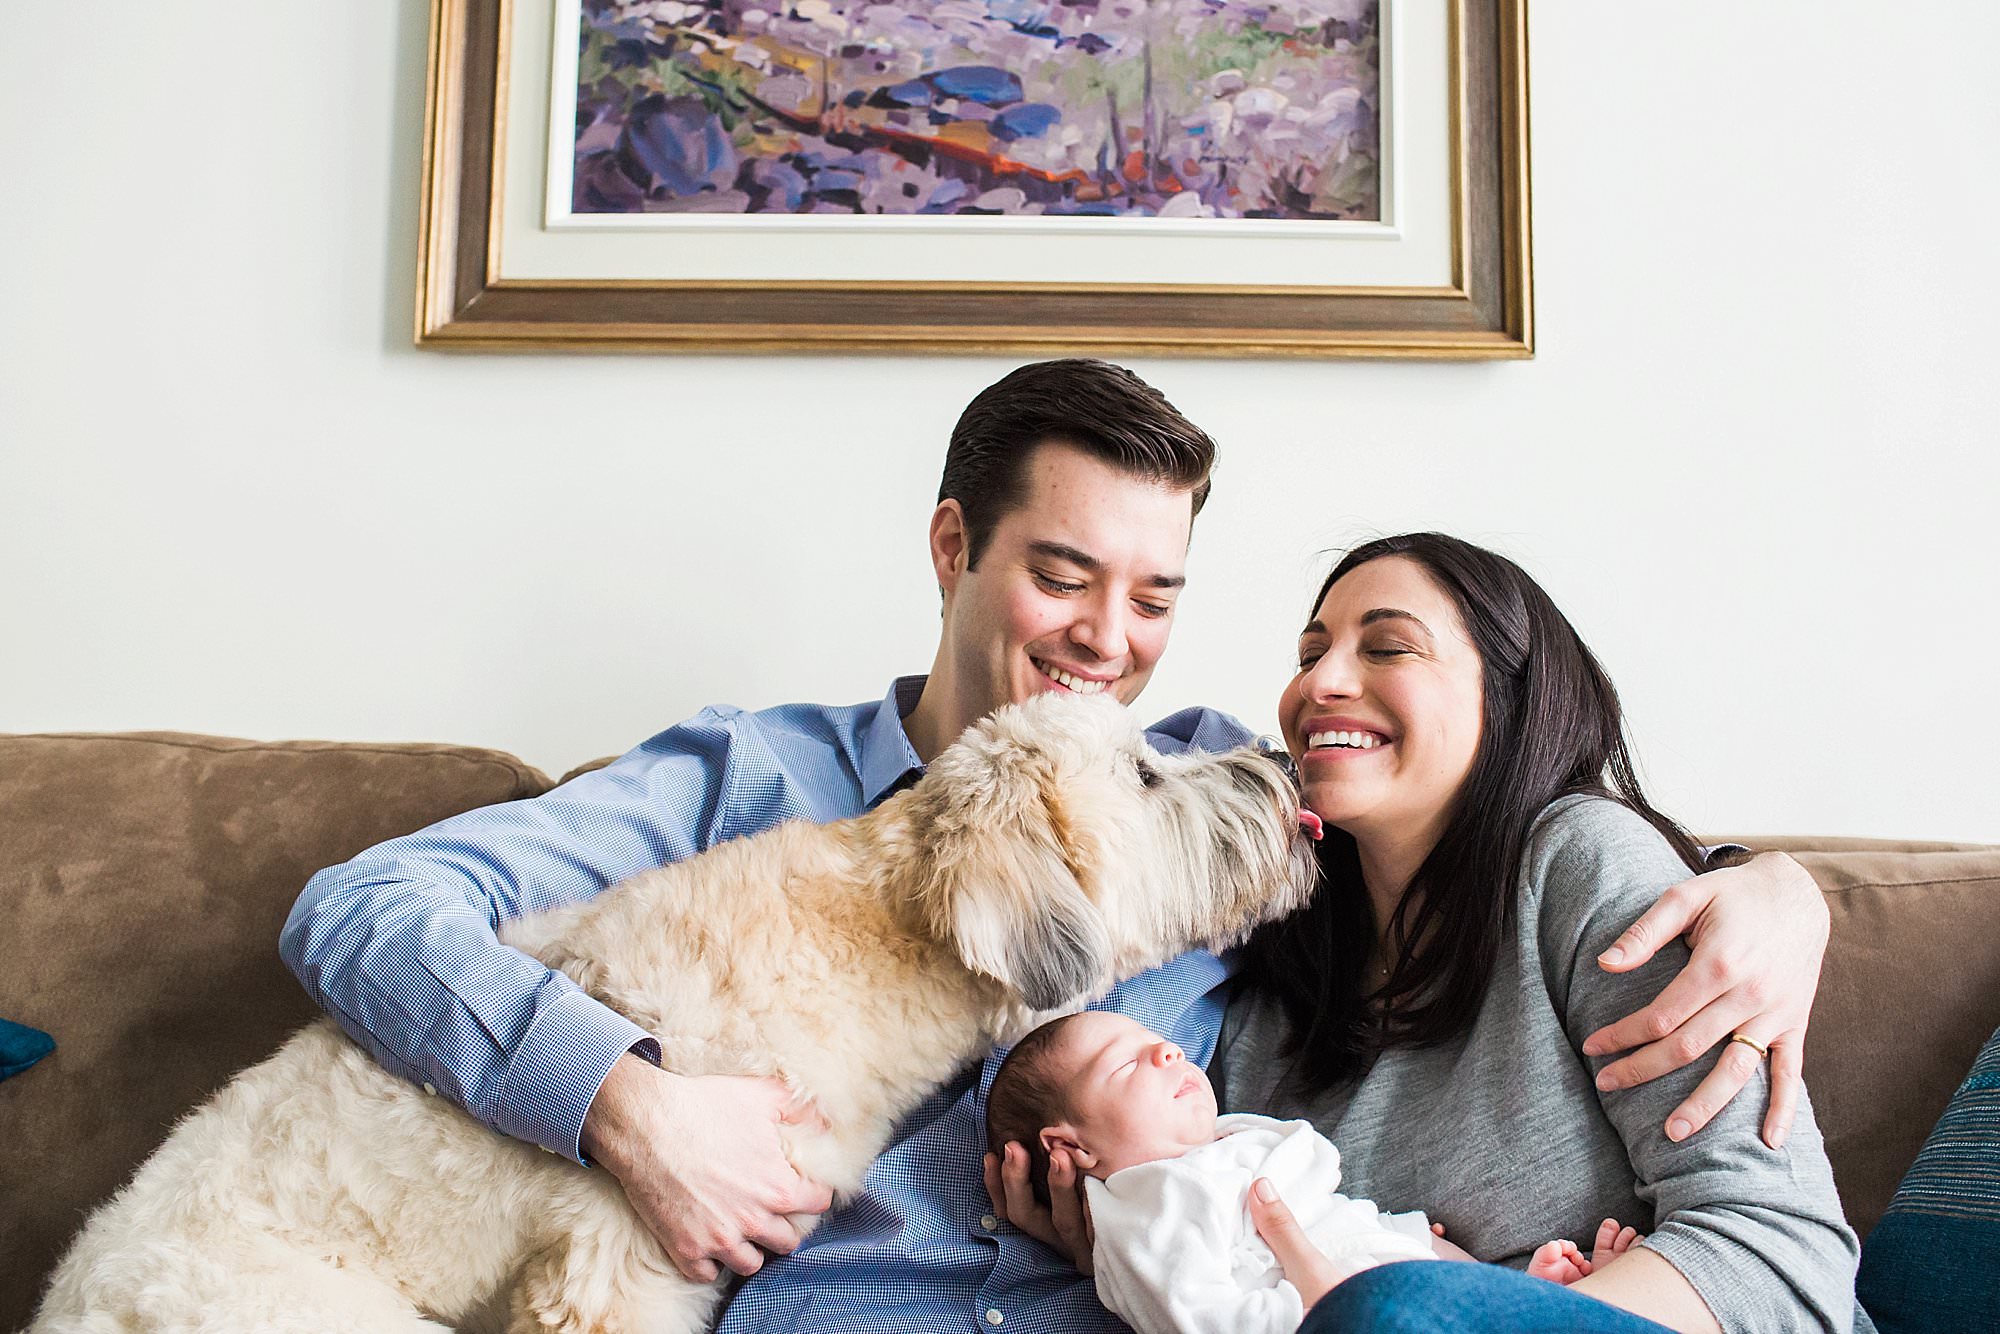 dog licking mom's face while holding newborn baby boston Boston natural indoor home session